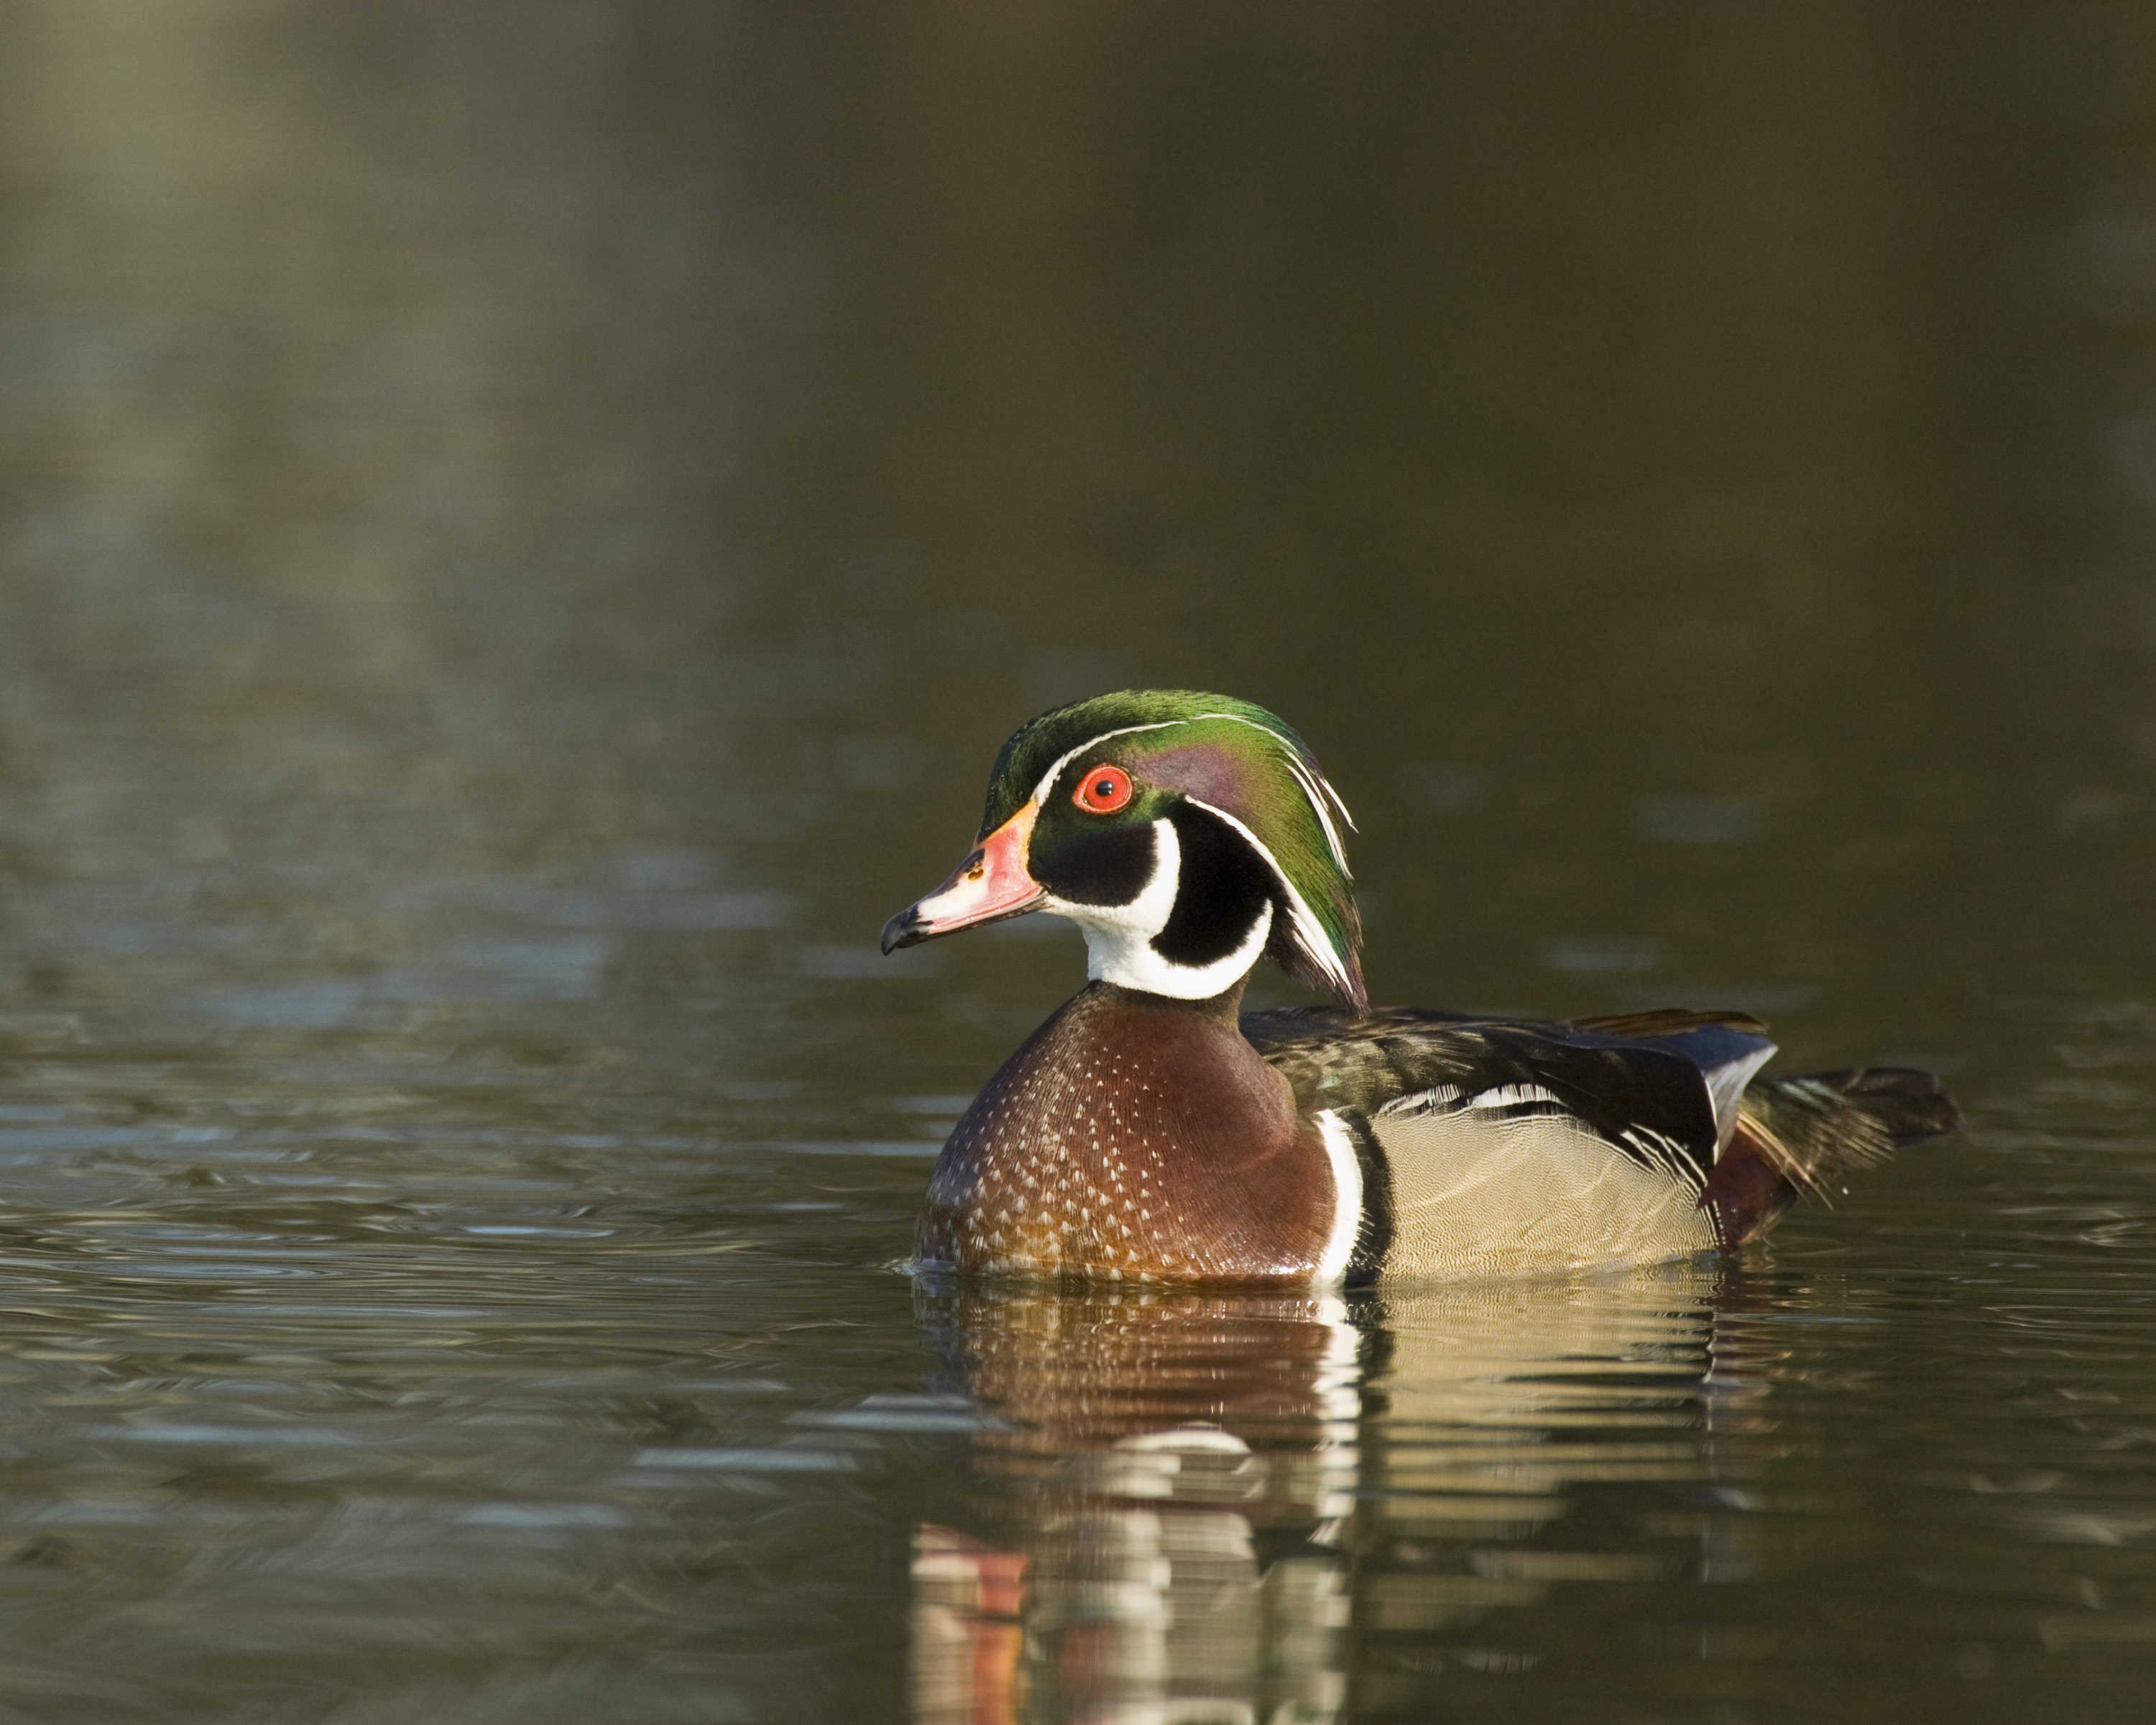 Male Wood Duck by Robin Arnold